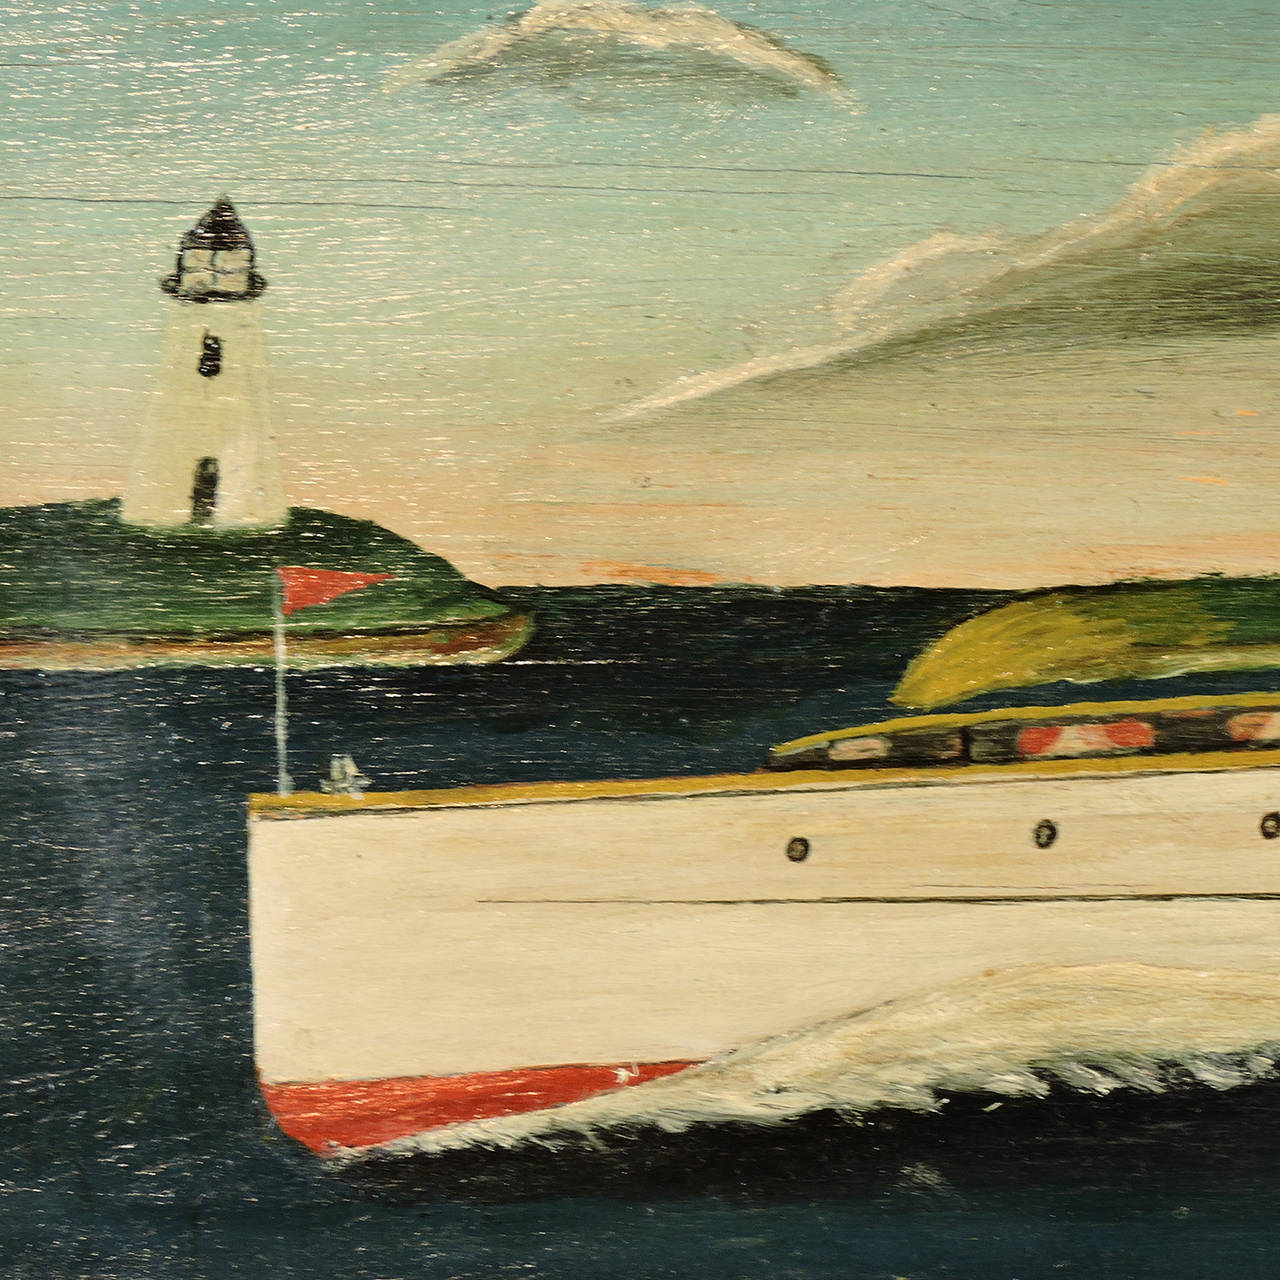 American Folk Art Painting of a Boat Speeding by a Lighthouse In Good Condition For Sale In Concord, MA